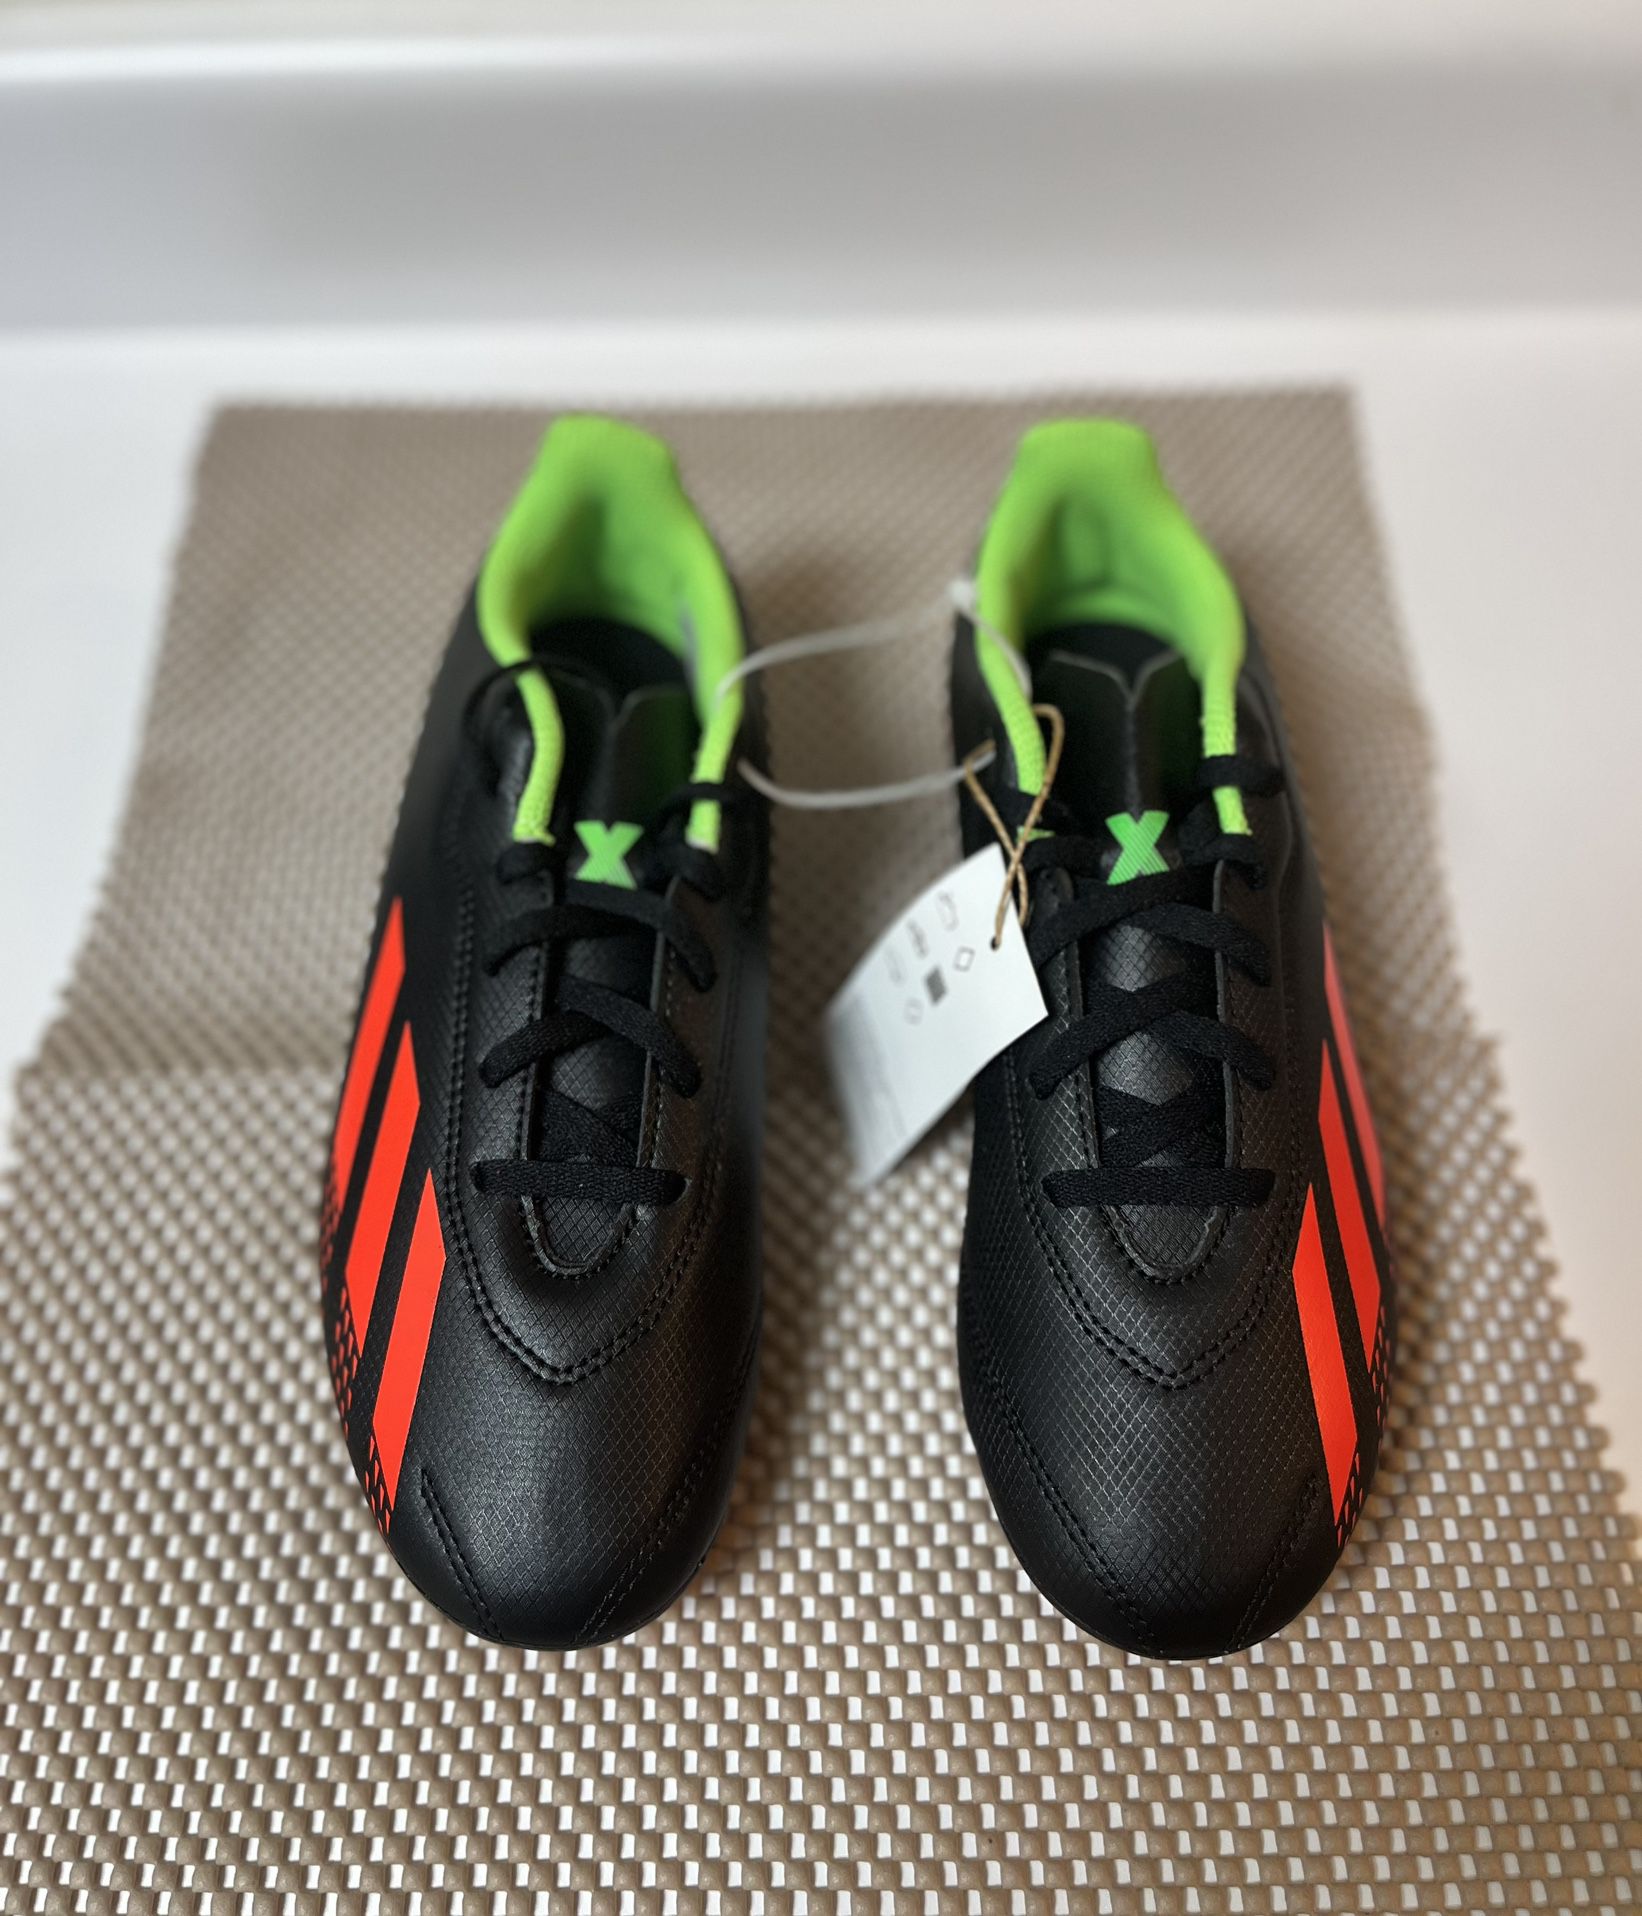 Kids Adidas Soccer Cleats - Size 5